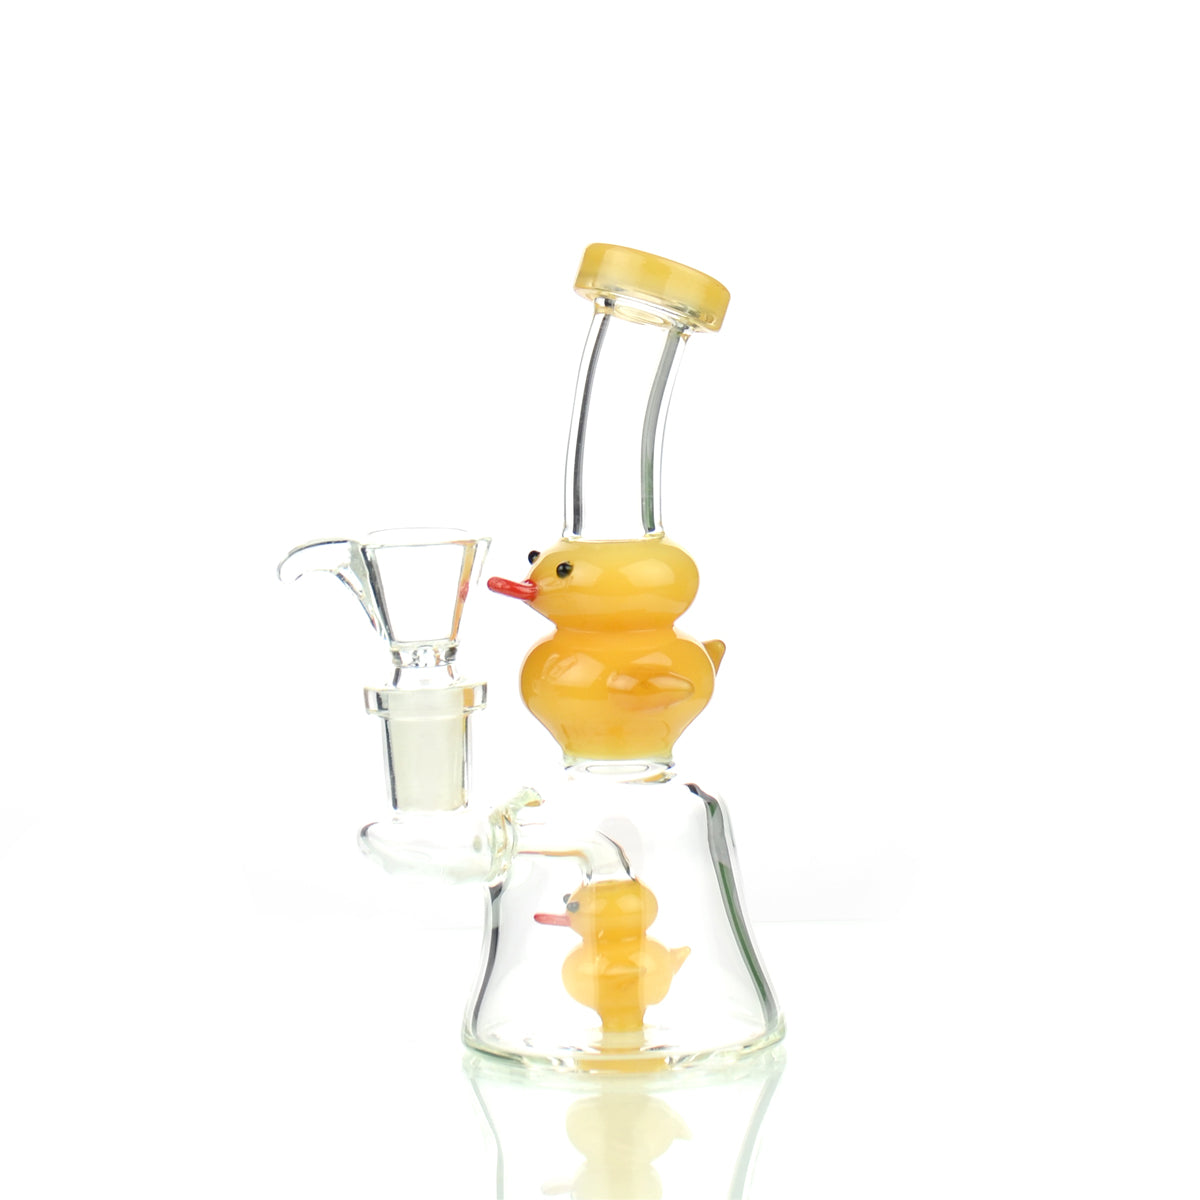 6'' Pato Water PIPE with 14mm Male Bowl